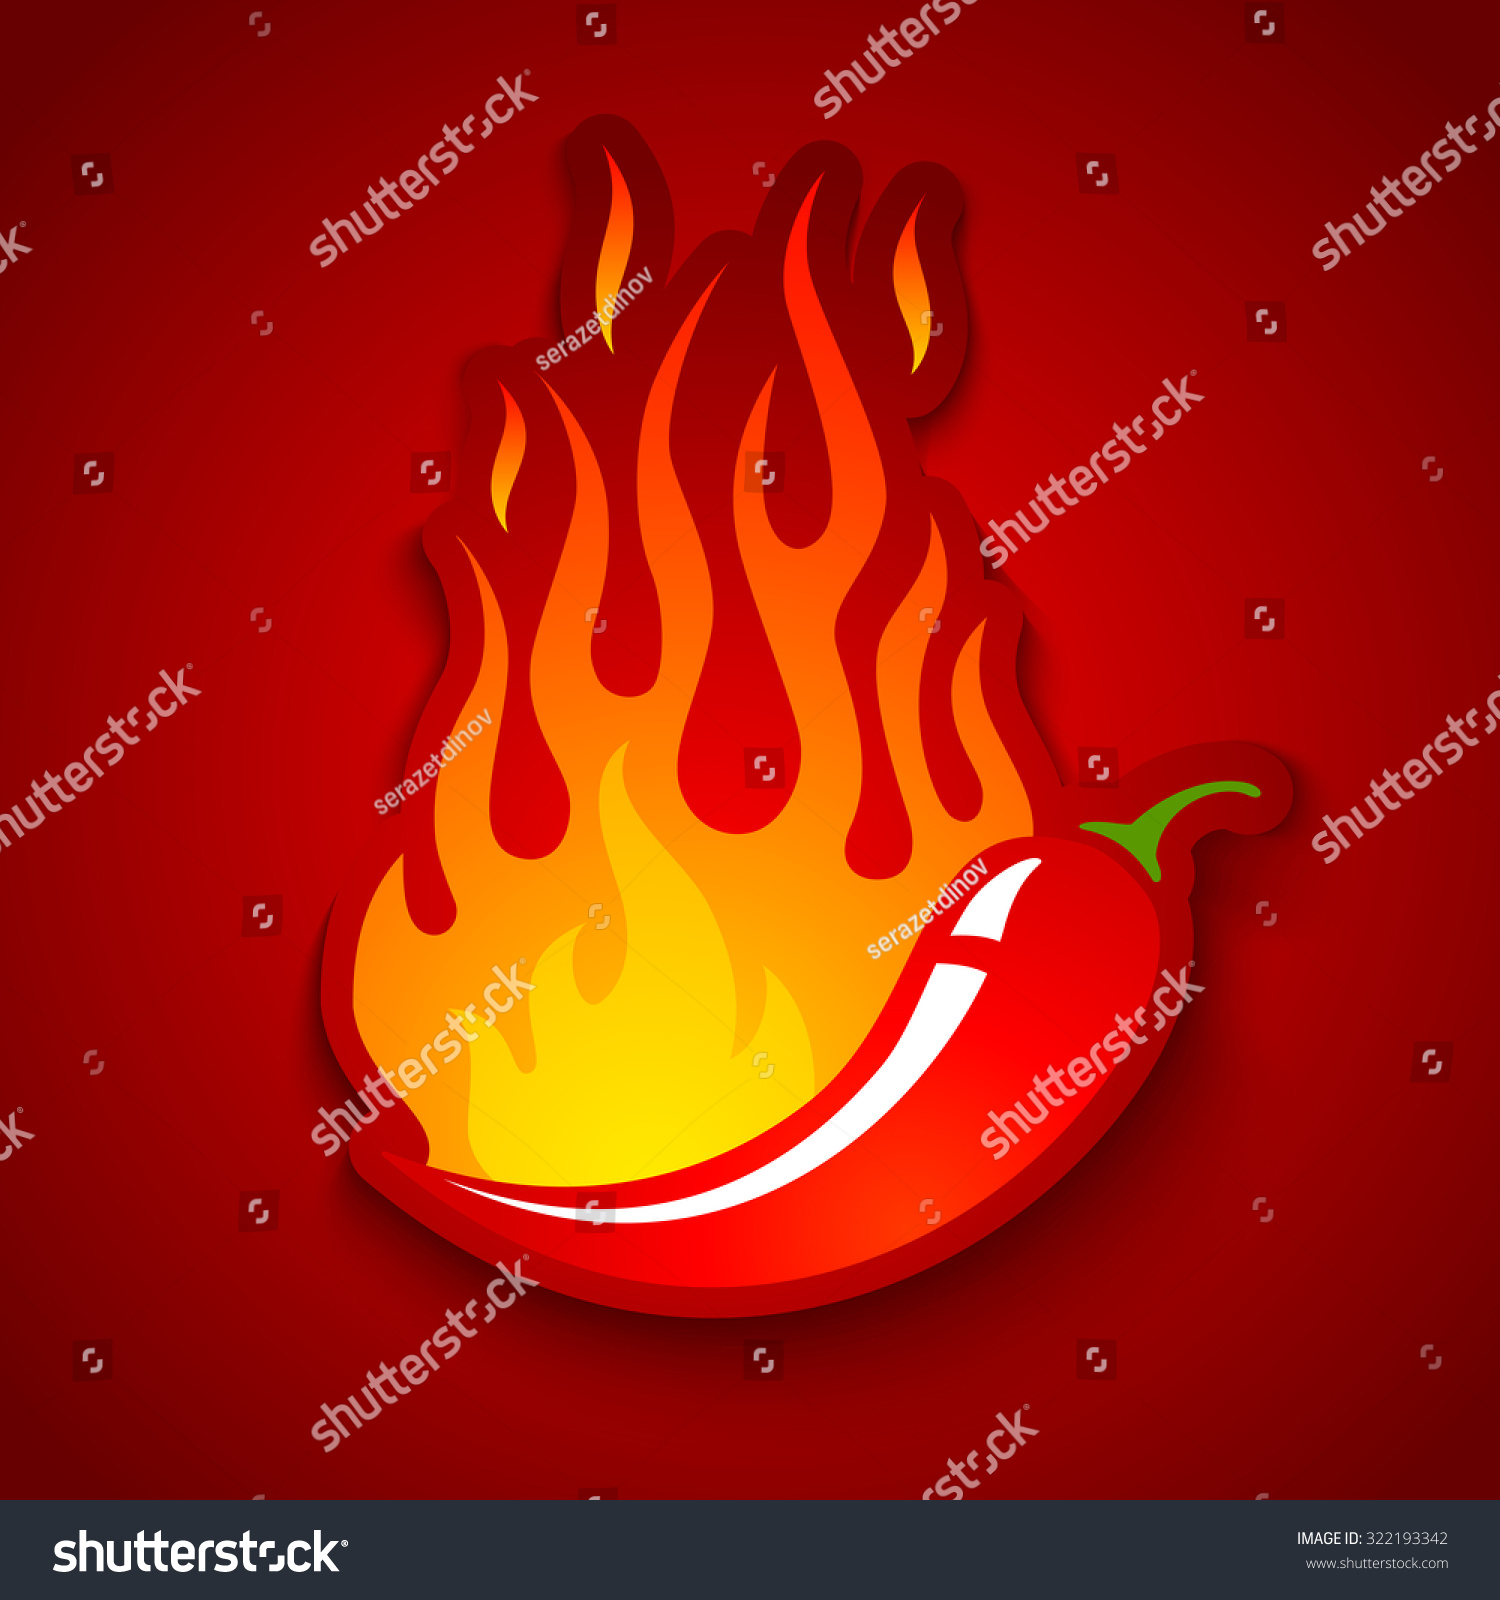 Vector illustration of a chili pepper in fire #322193342